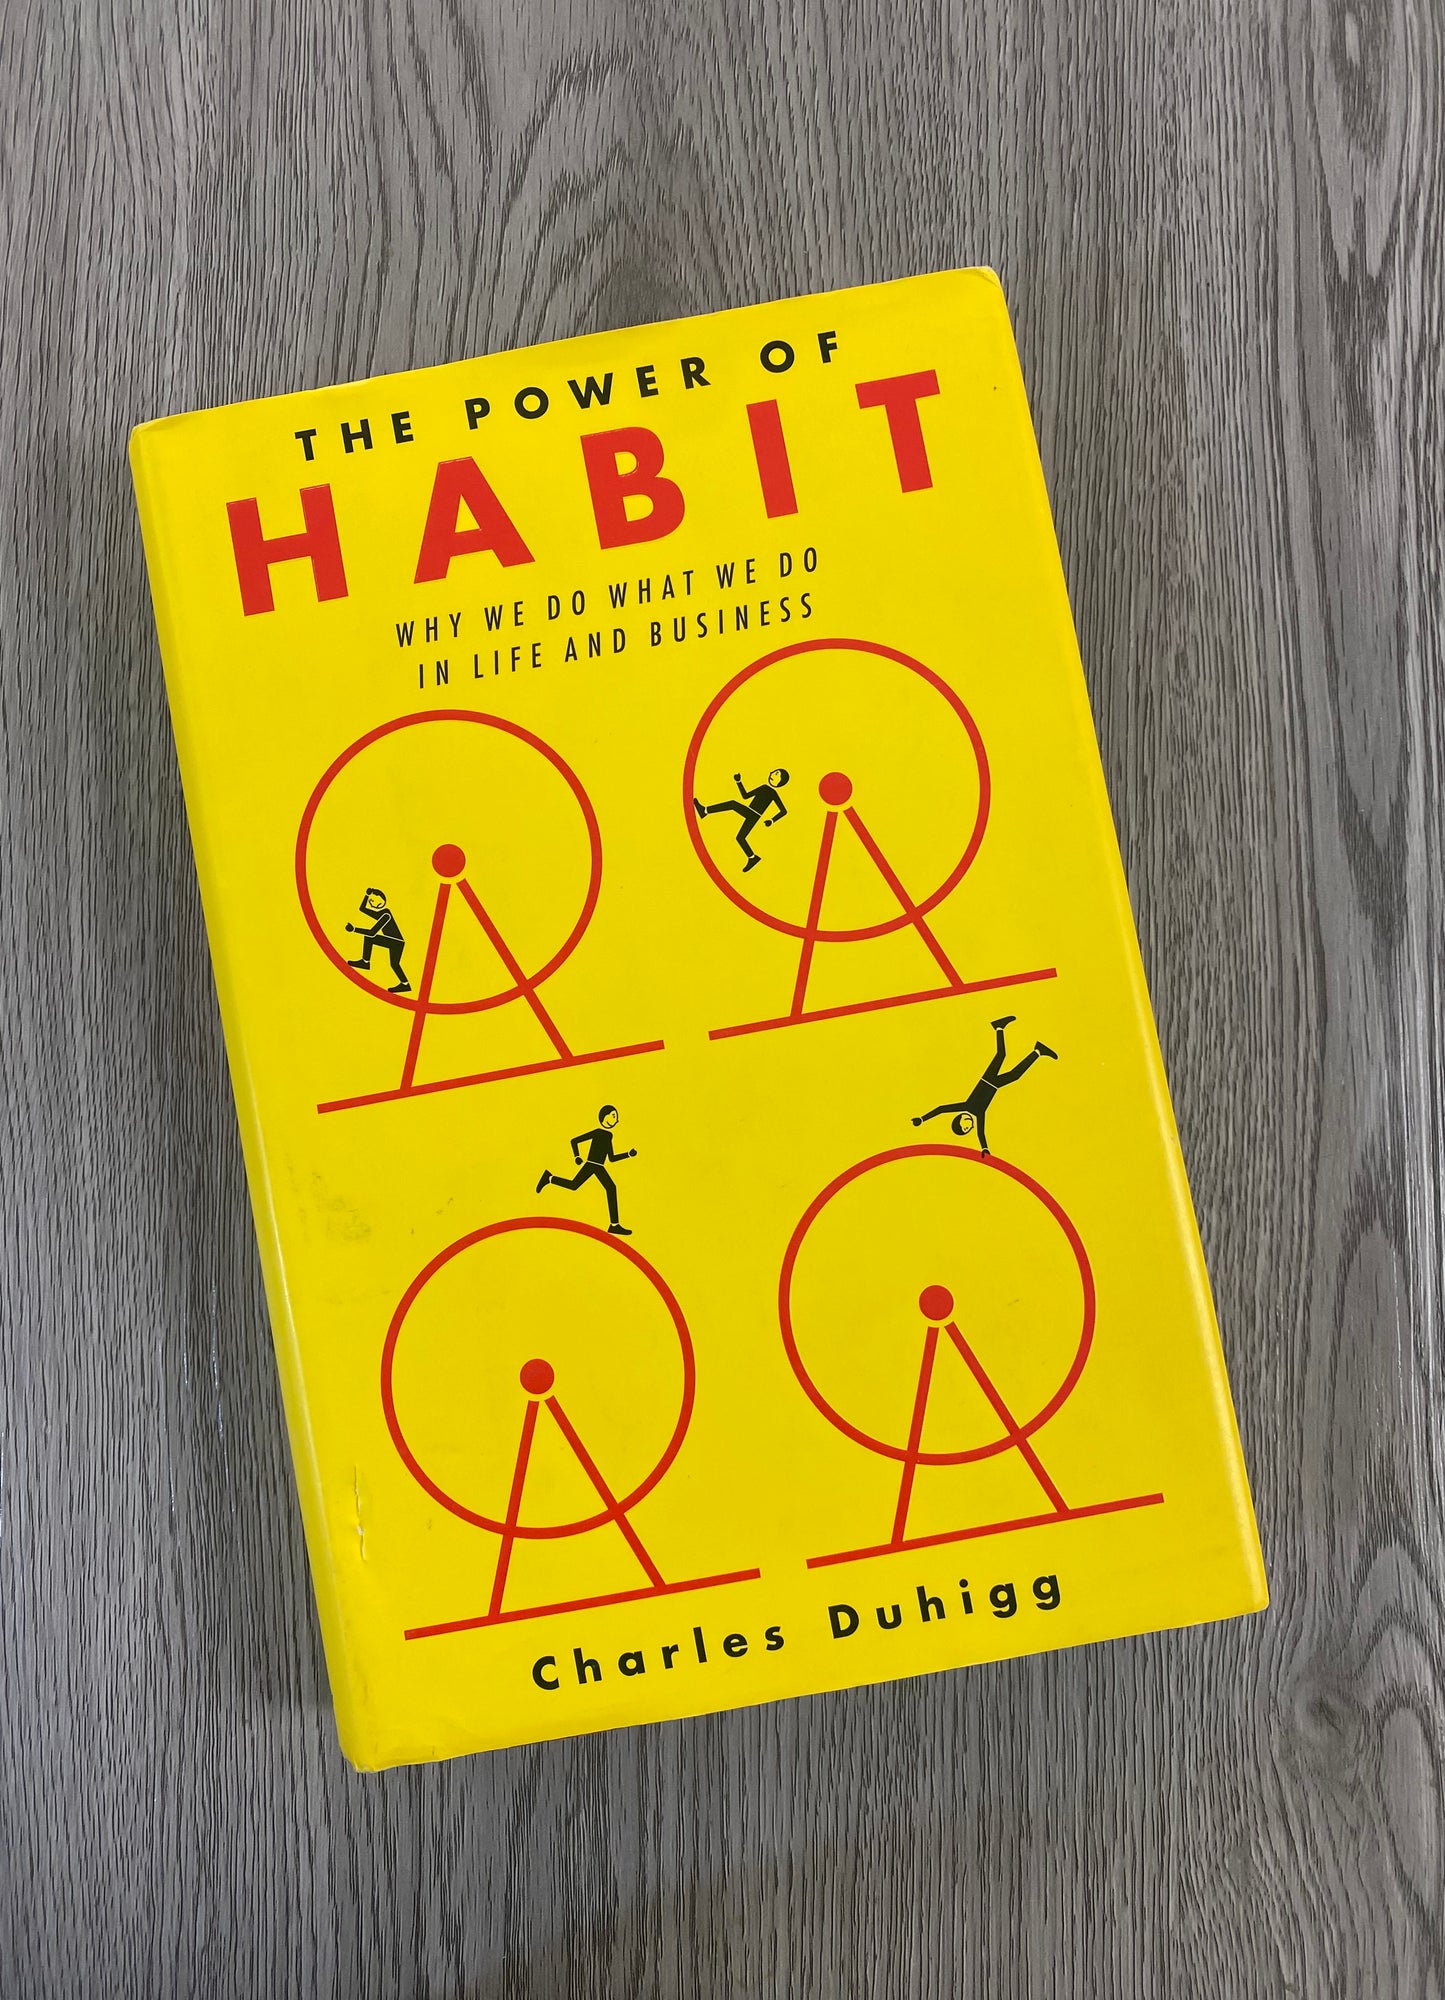 The Power of Habit: Why we do What we do in Life and Business by Charles Duhigg-Hardcover